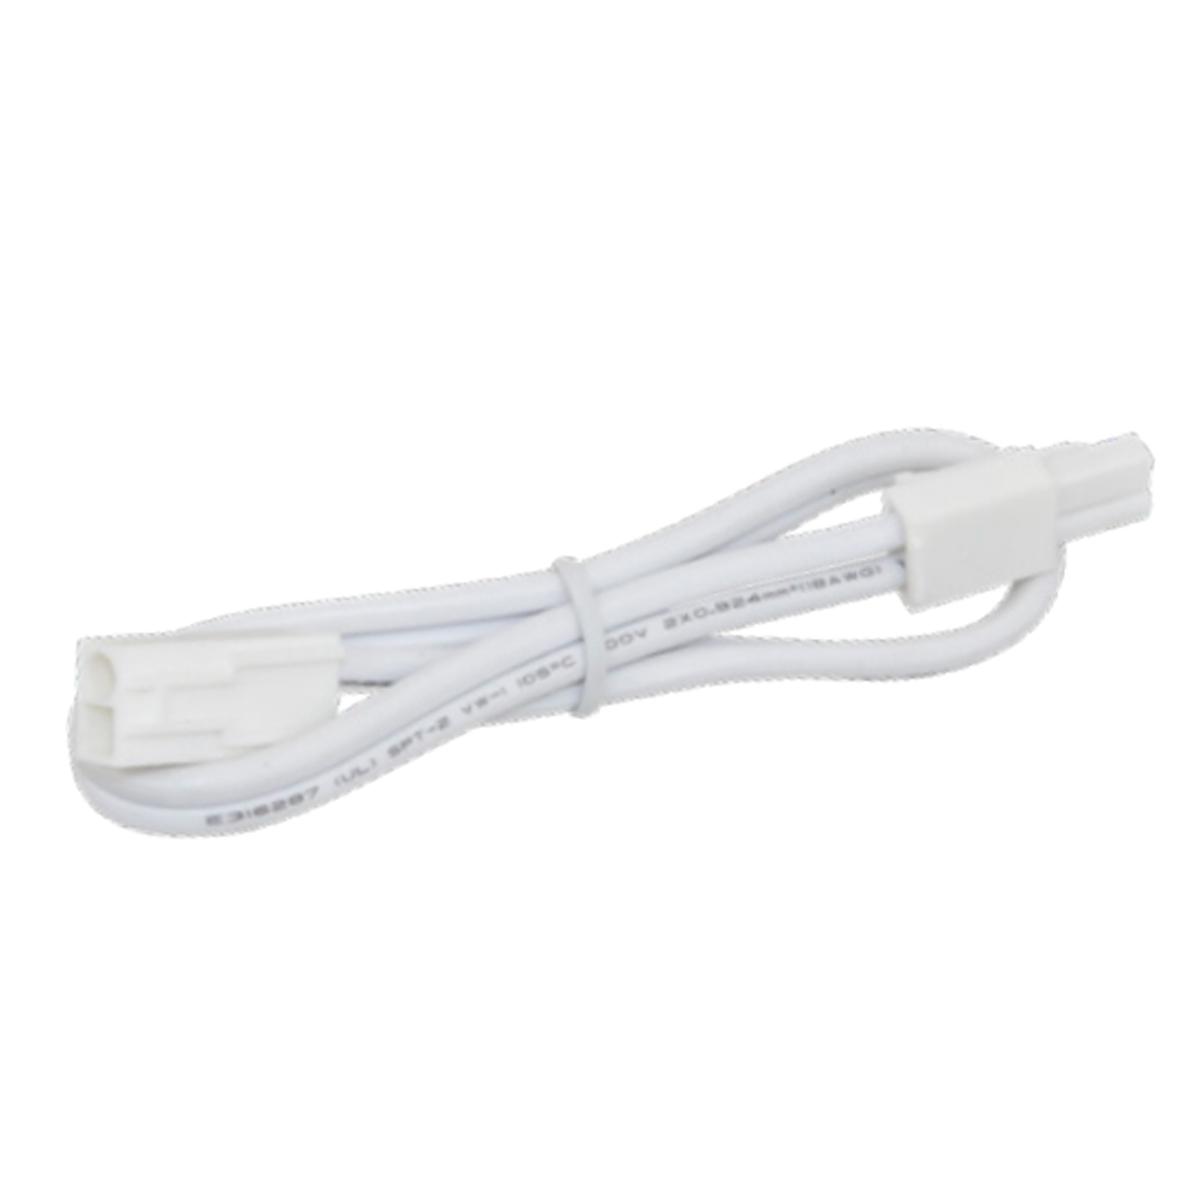 MVP 24in. Linking Cable, White